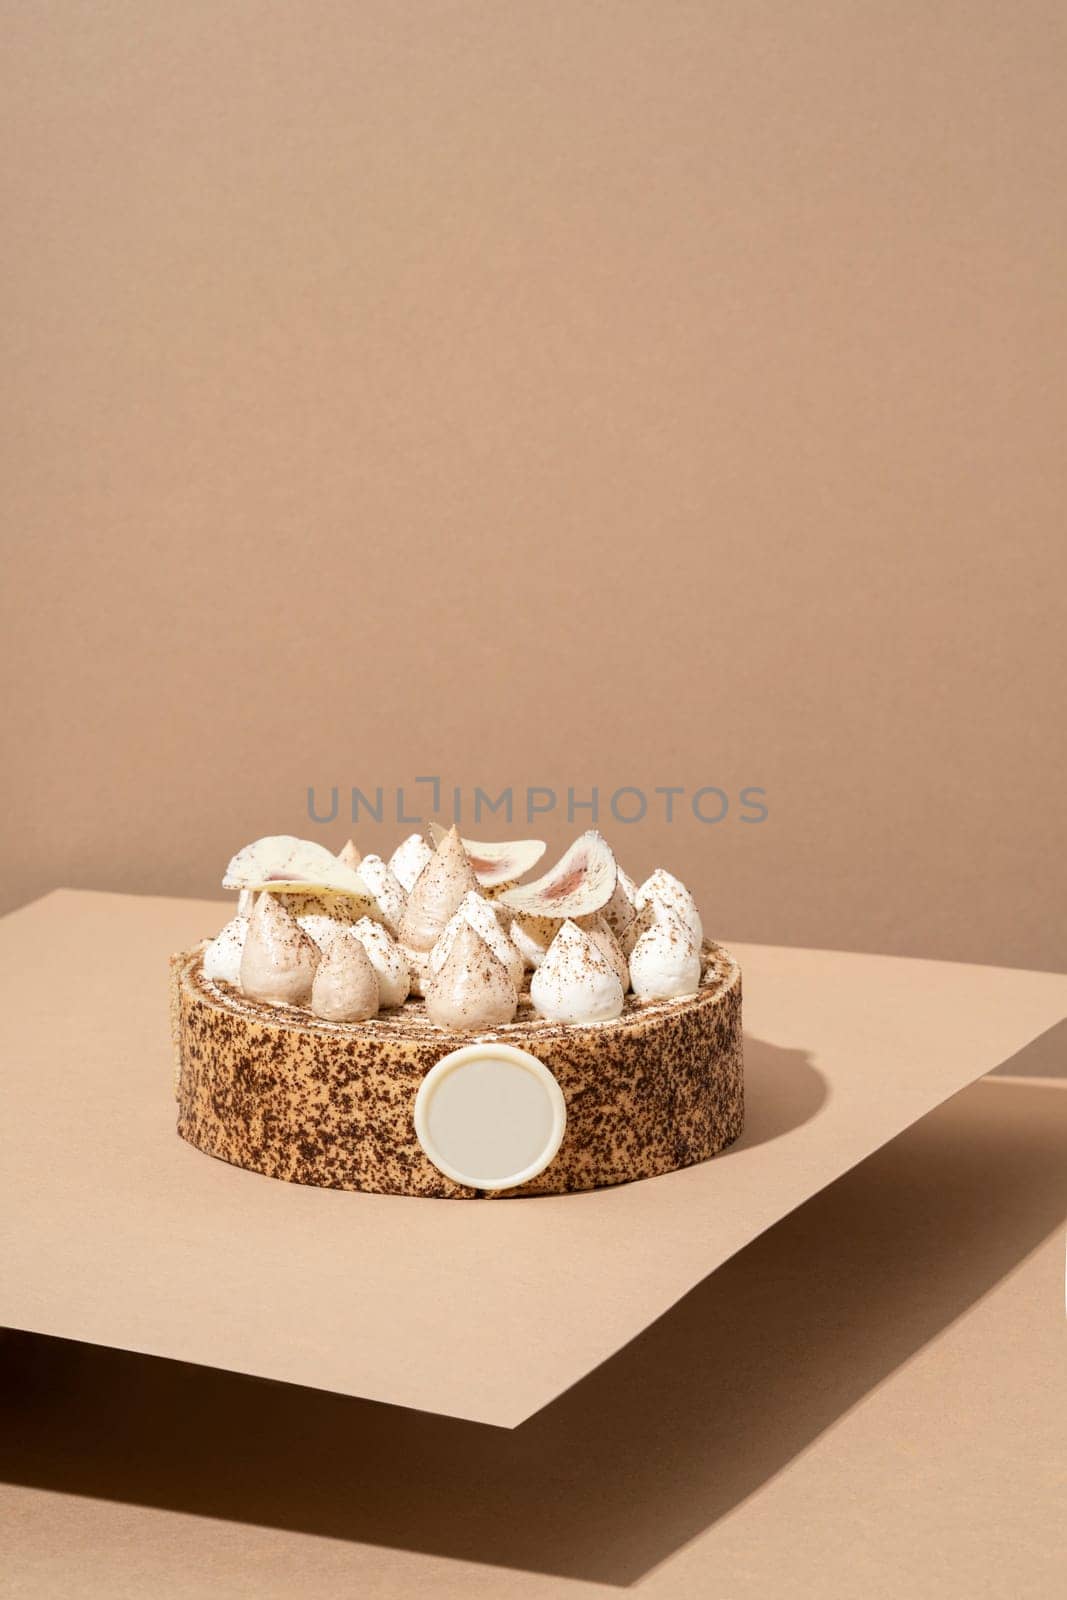 A scrumptious desert plate featuring a meringue desert, served on a cardboard plate and topped with cream by A_Karim